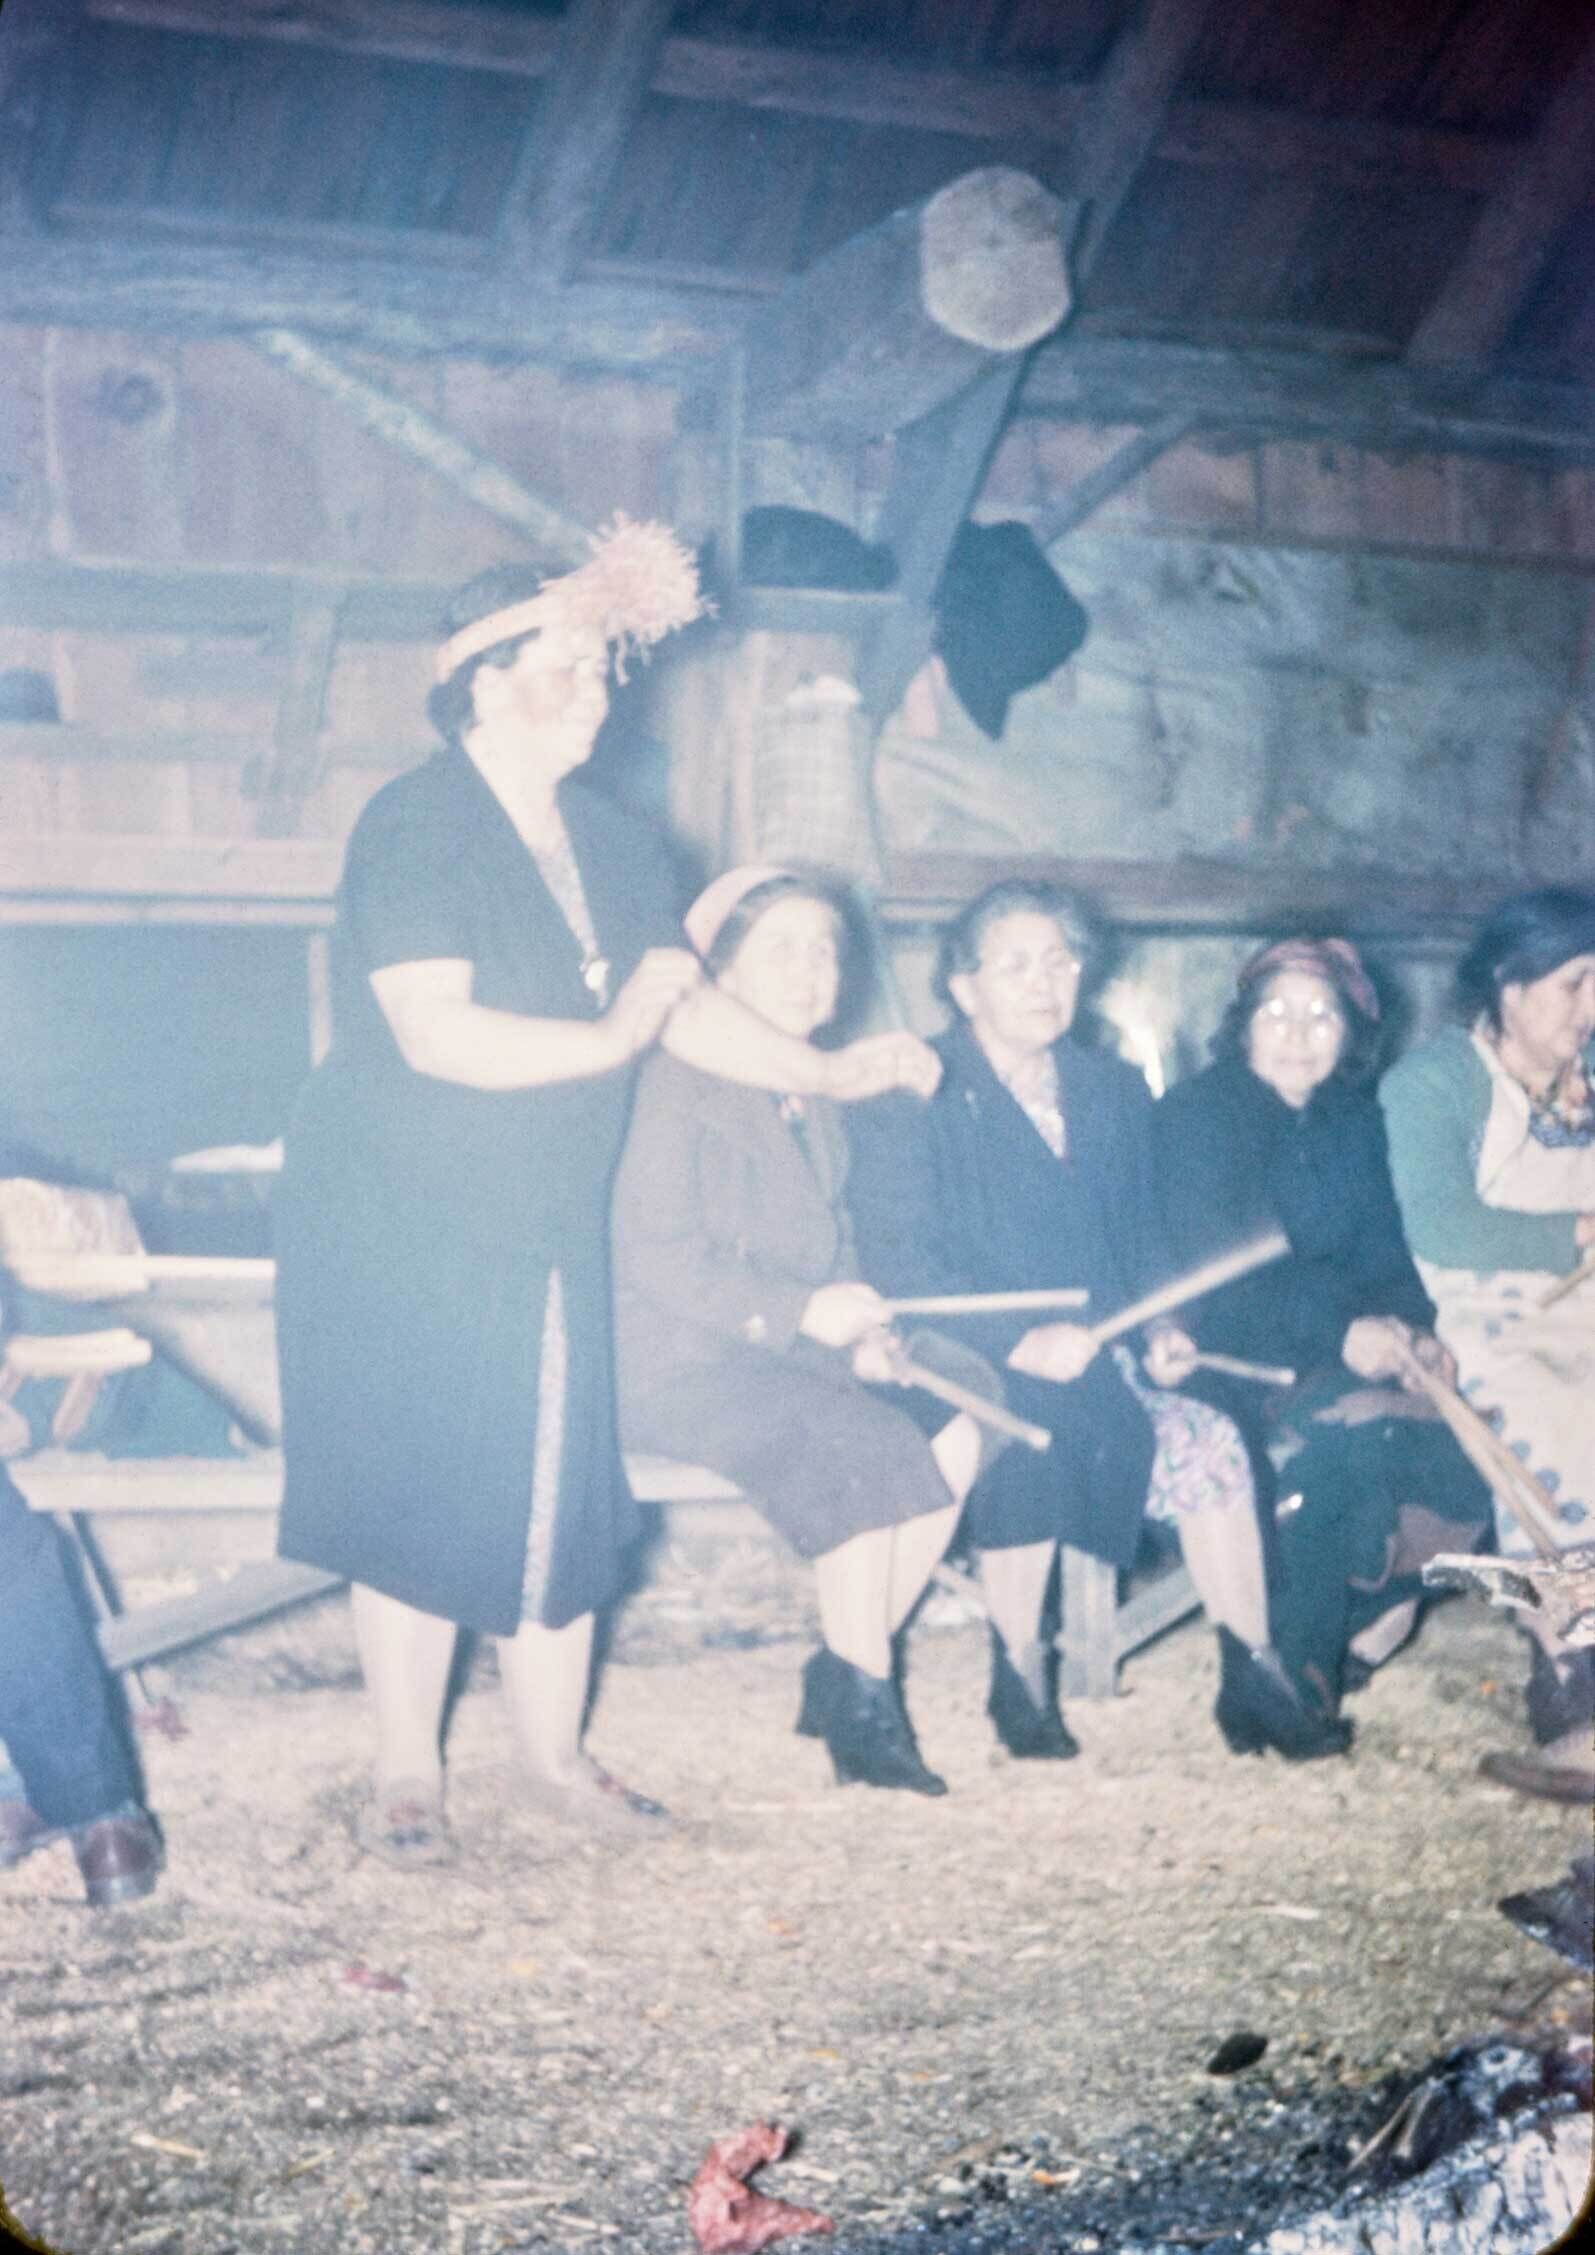 An old slide photograph of four women sitting with instruments and one woman dancing.